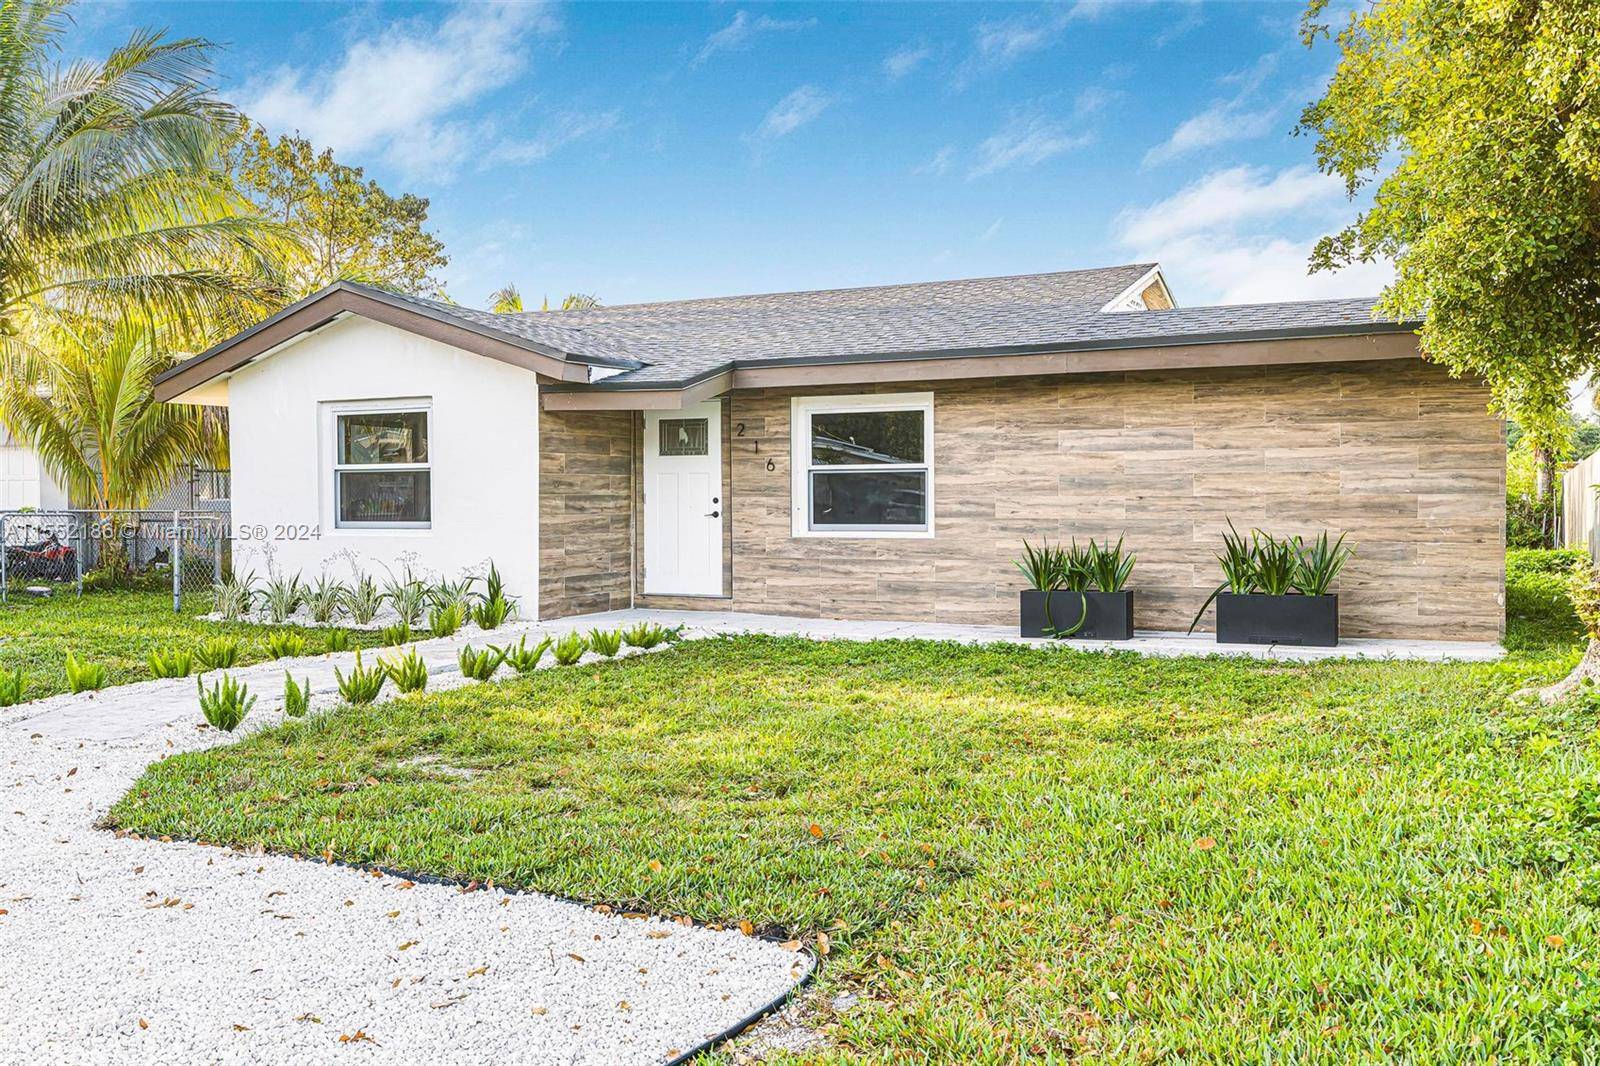 Completely Gut Renovated 3 Bedroom 2 Bathroom Home in the Heart of Miami.